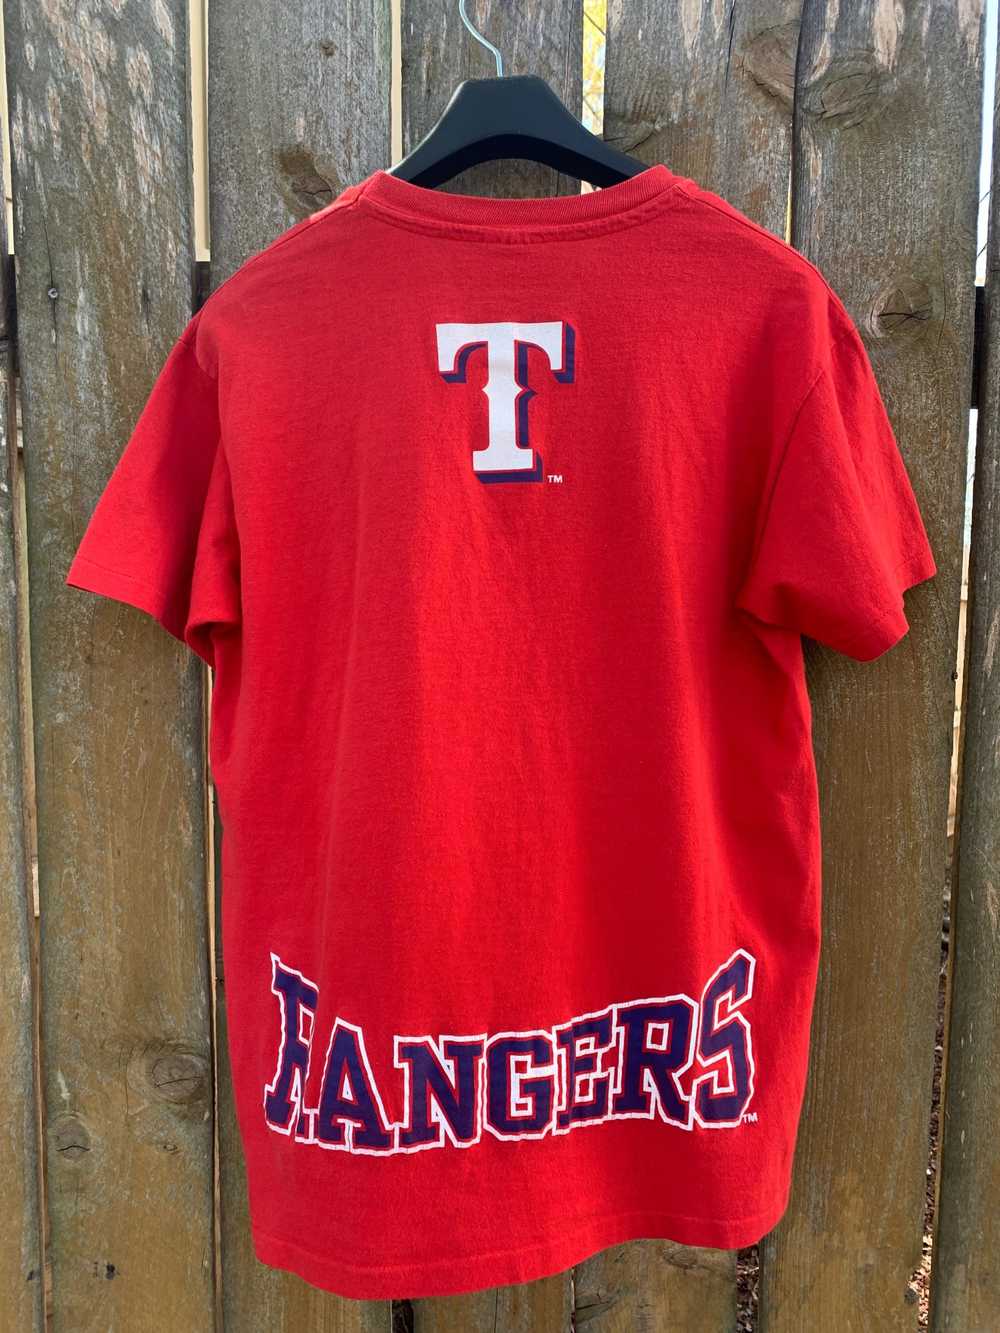 NWT Majestic Texas Rangers T Shirt Mens Small Red